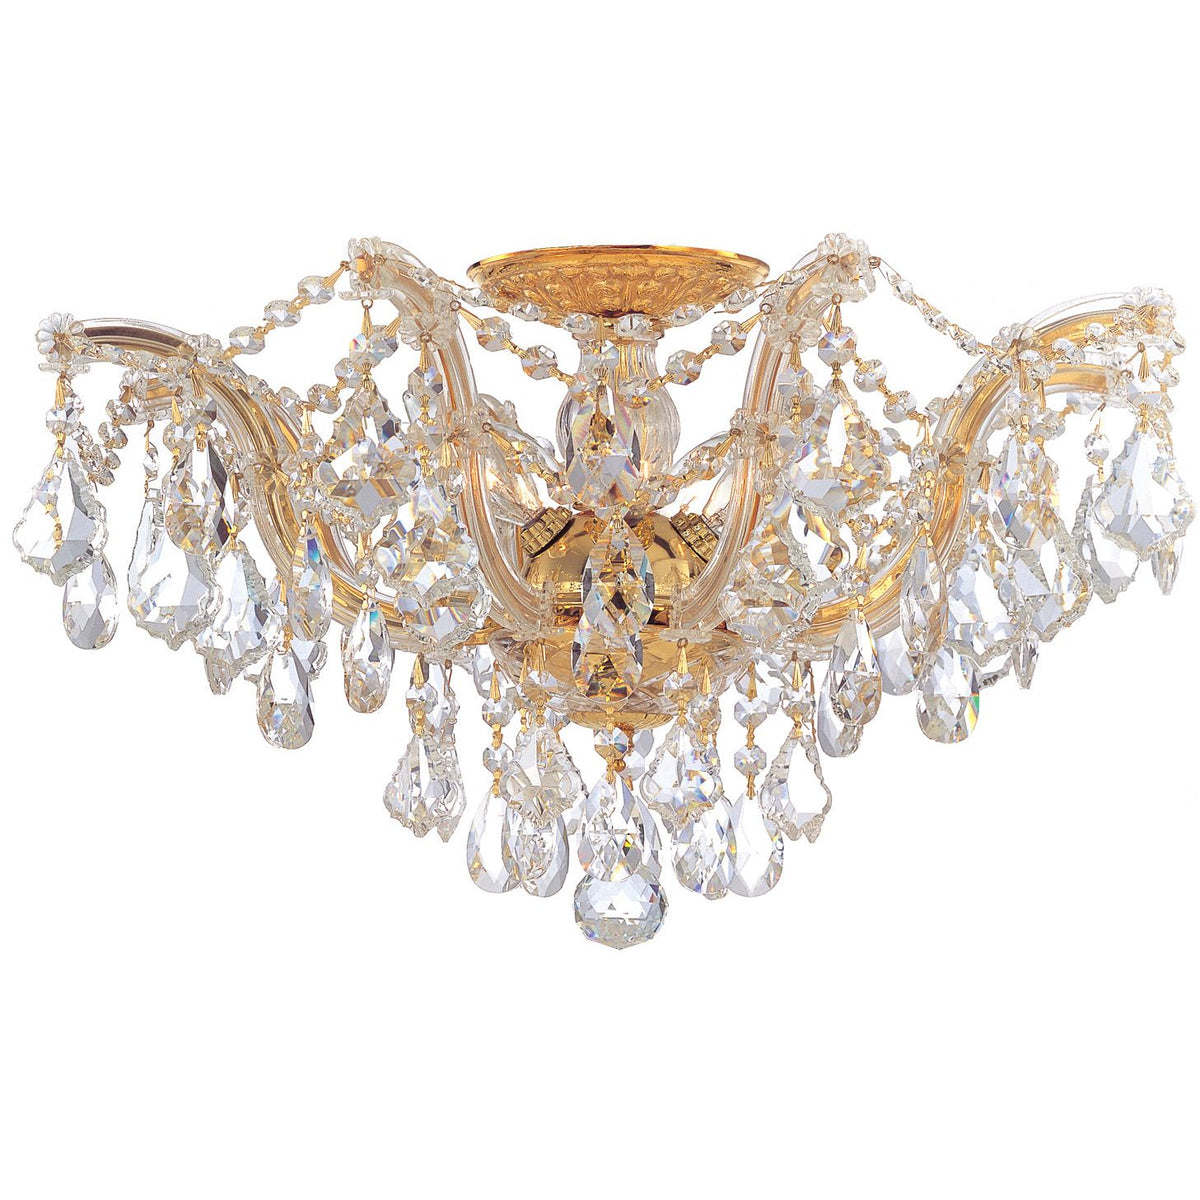 Crystorama - 4437-GD-CL-S - Five Light Ceiling Mount - Maria Theresa - Gold